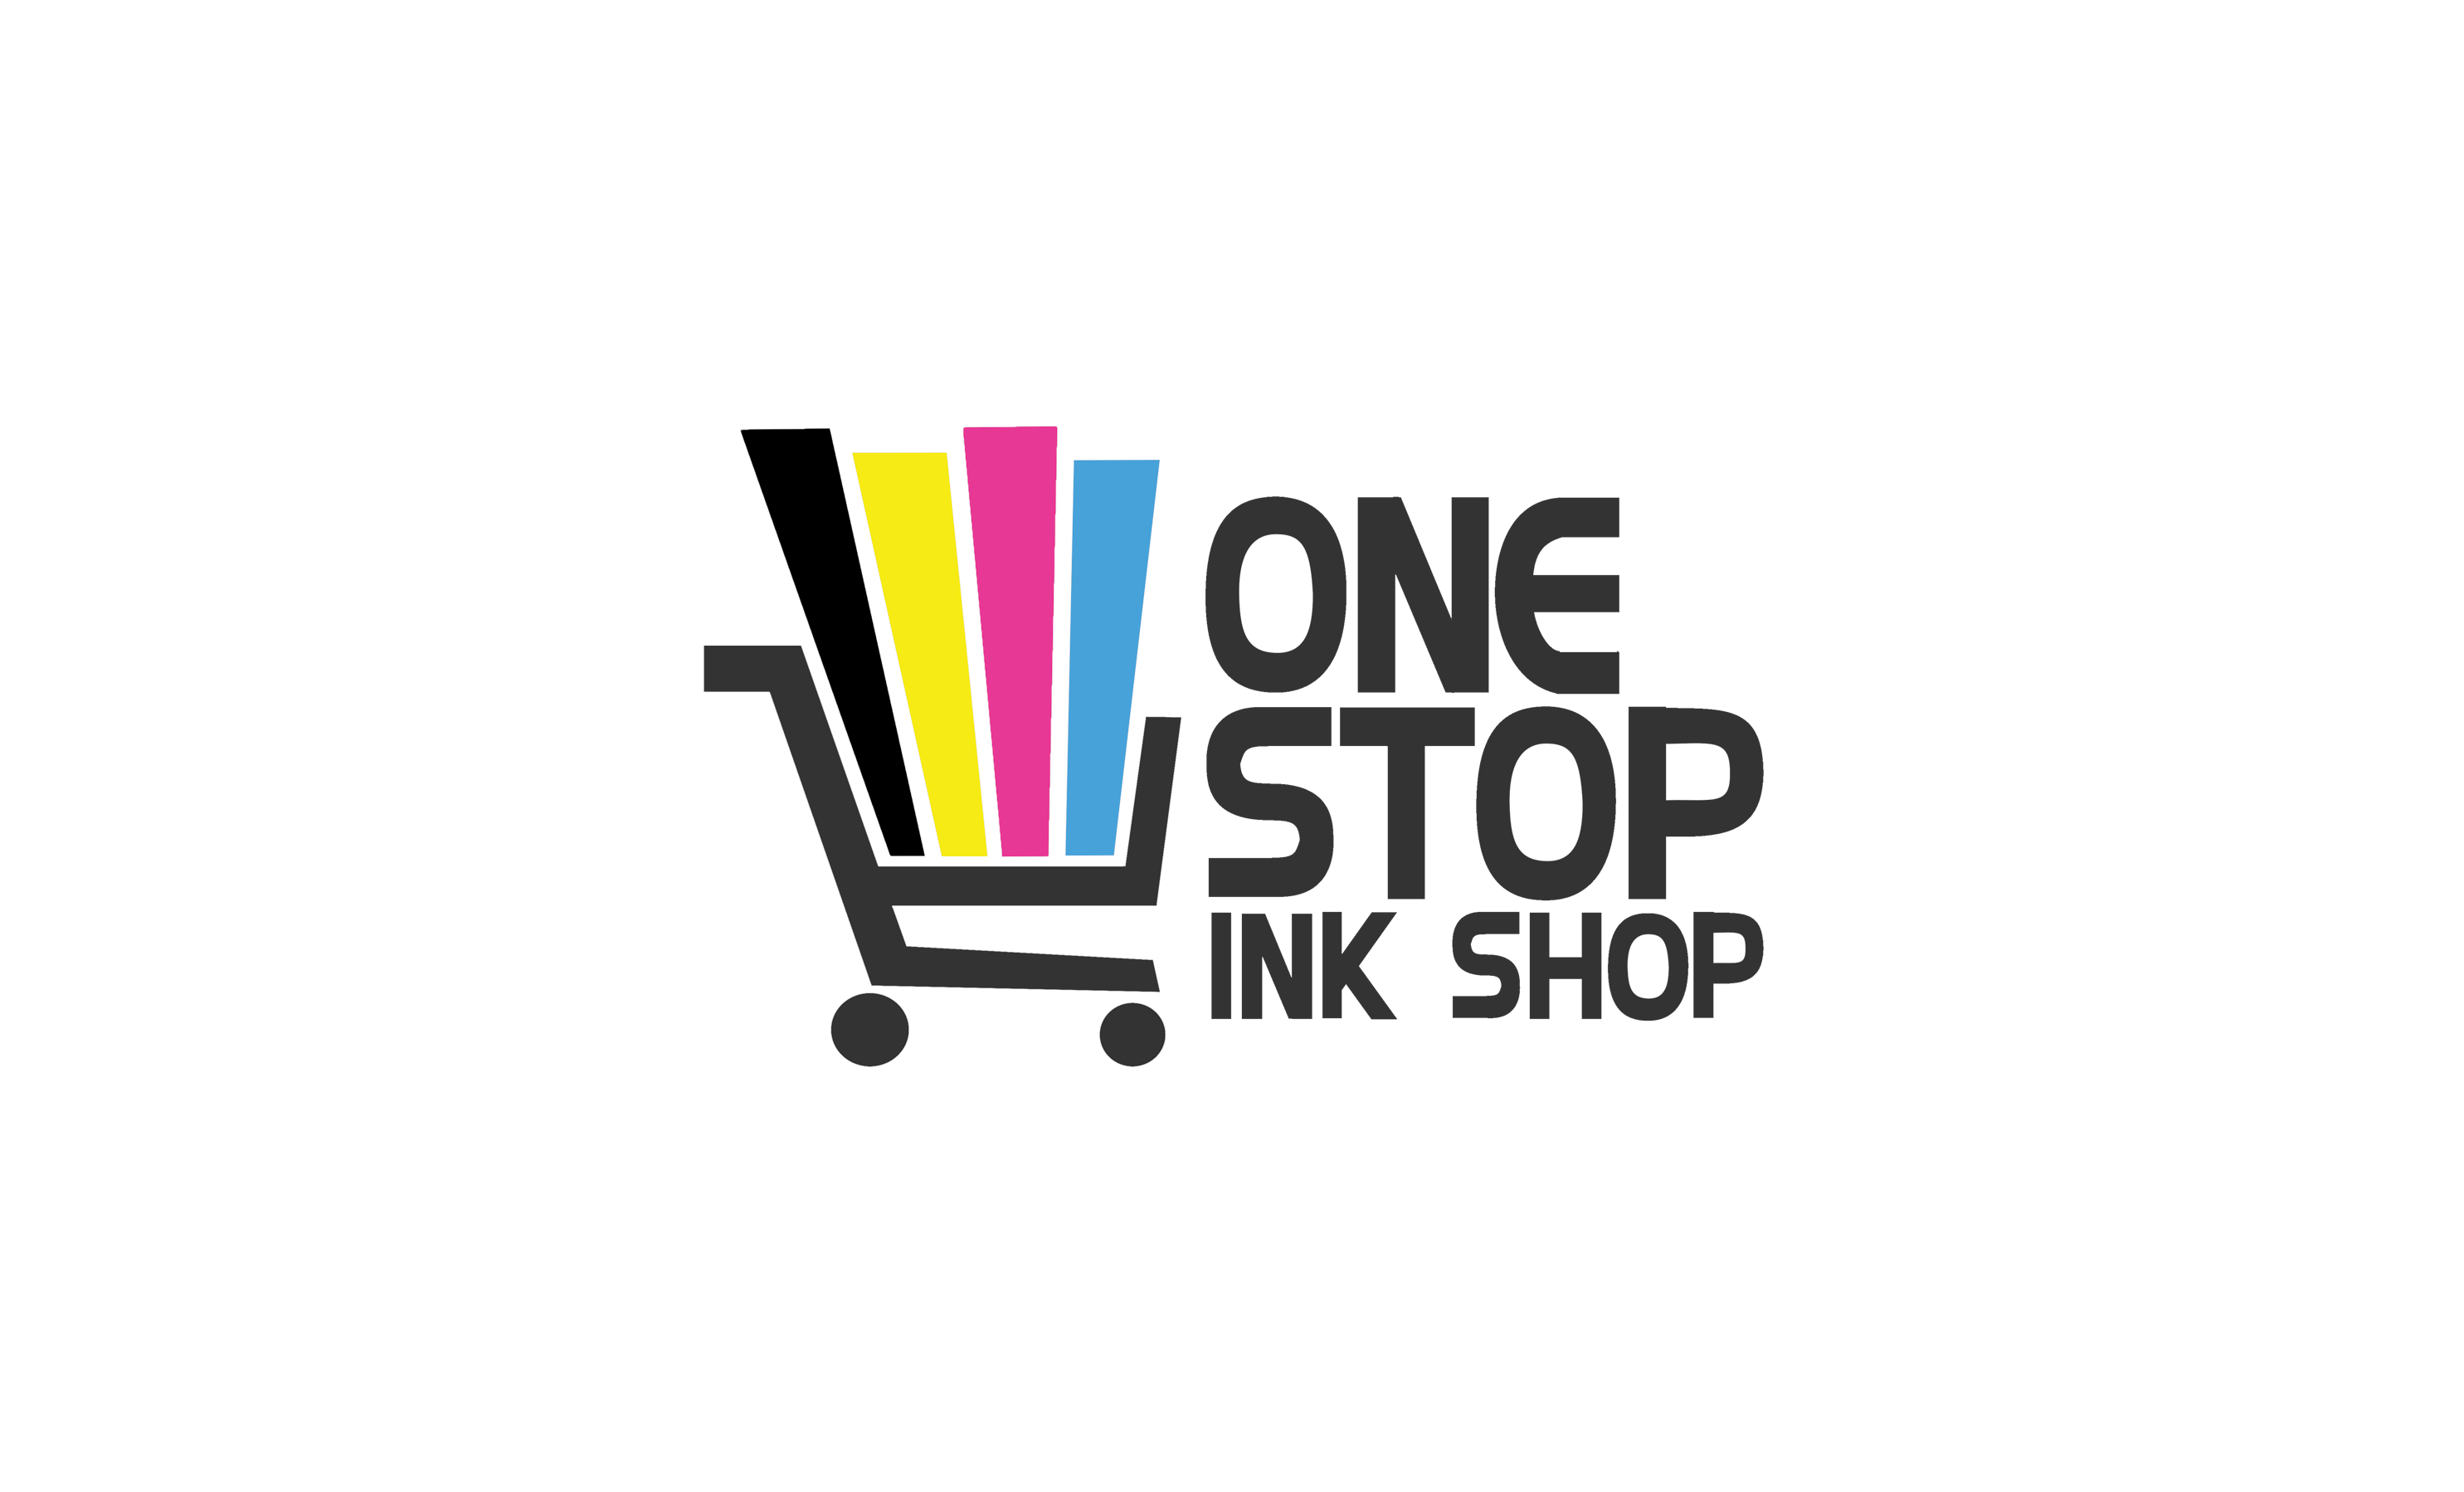 One Stop Ink Shop